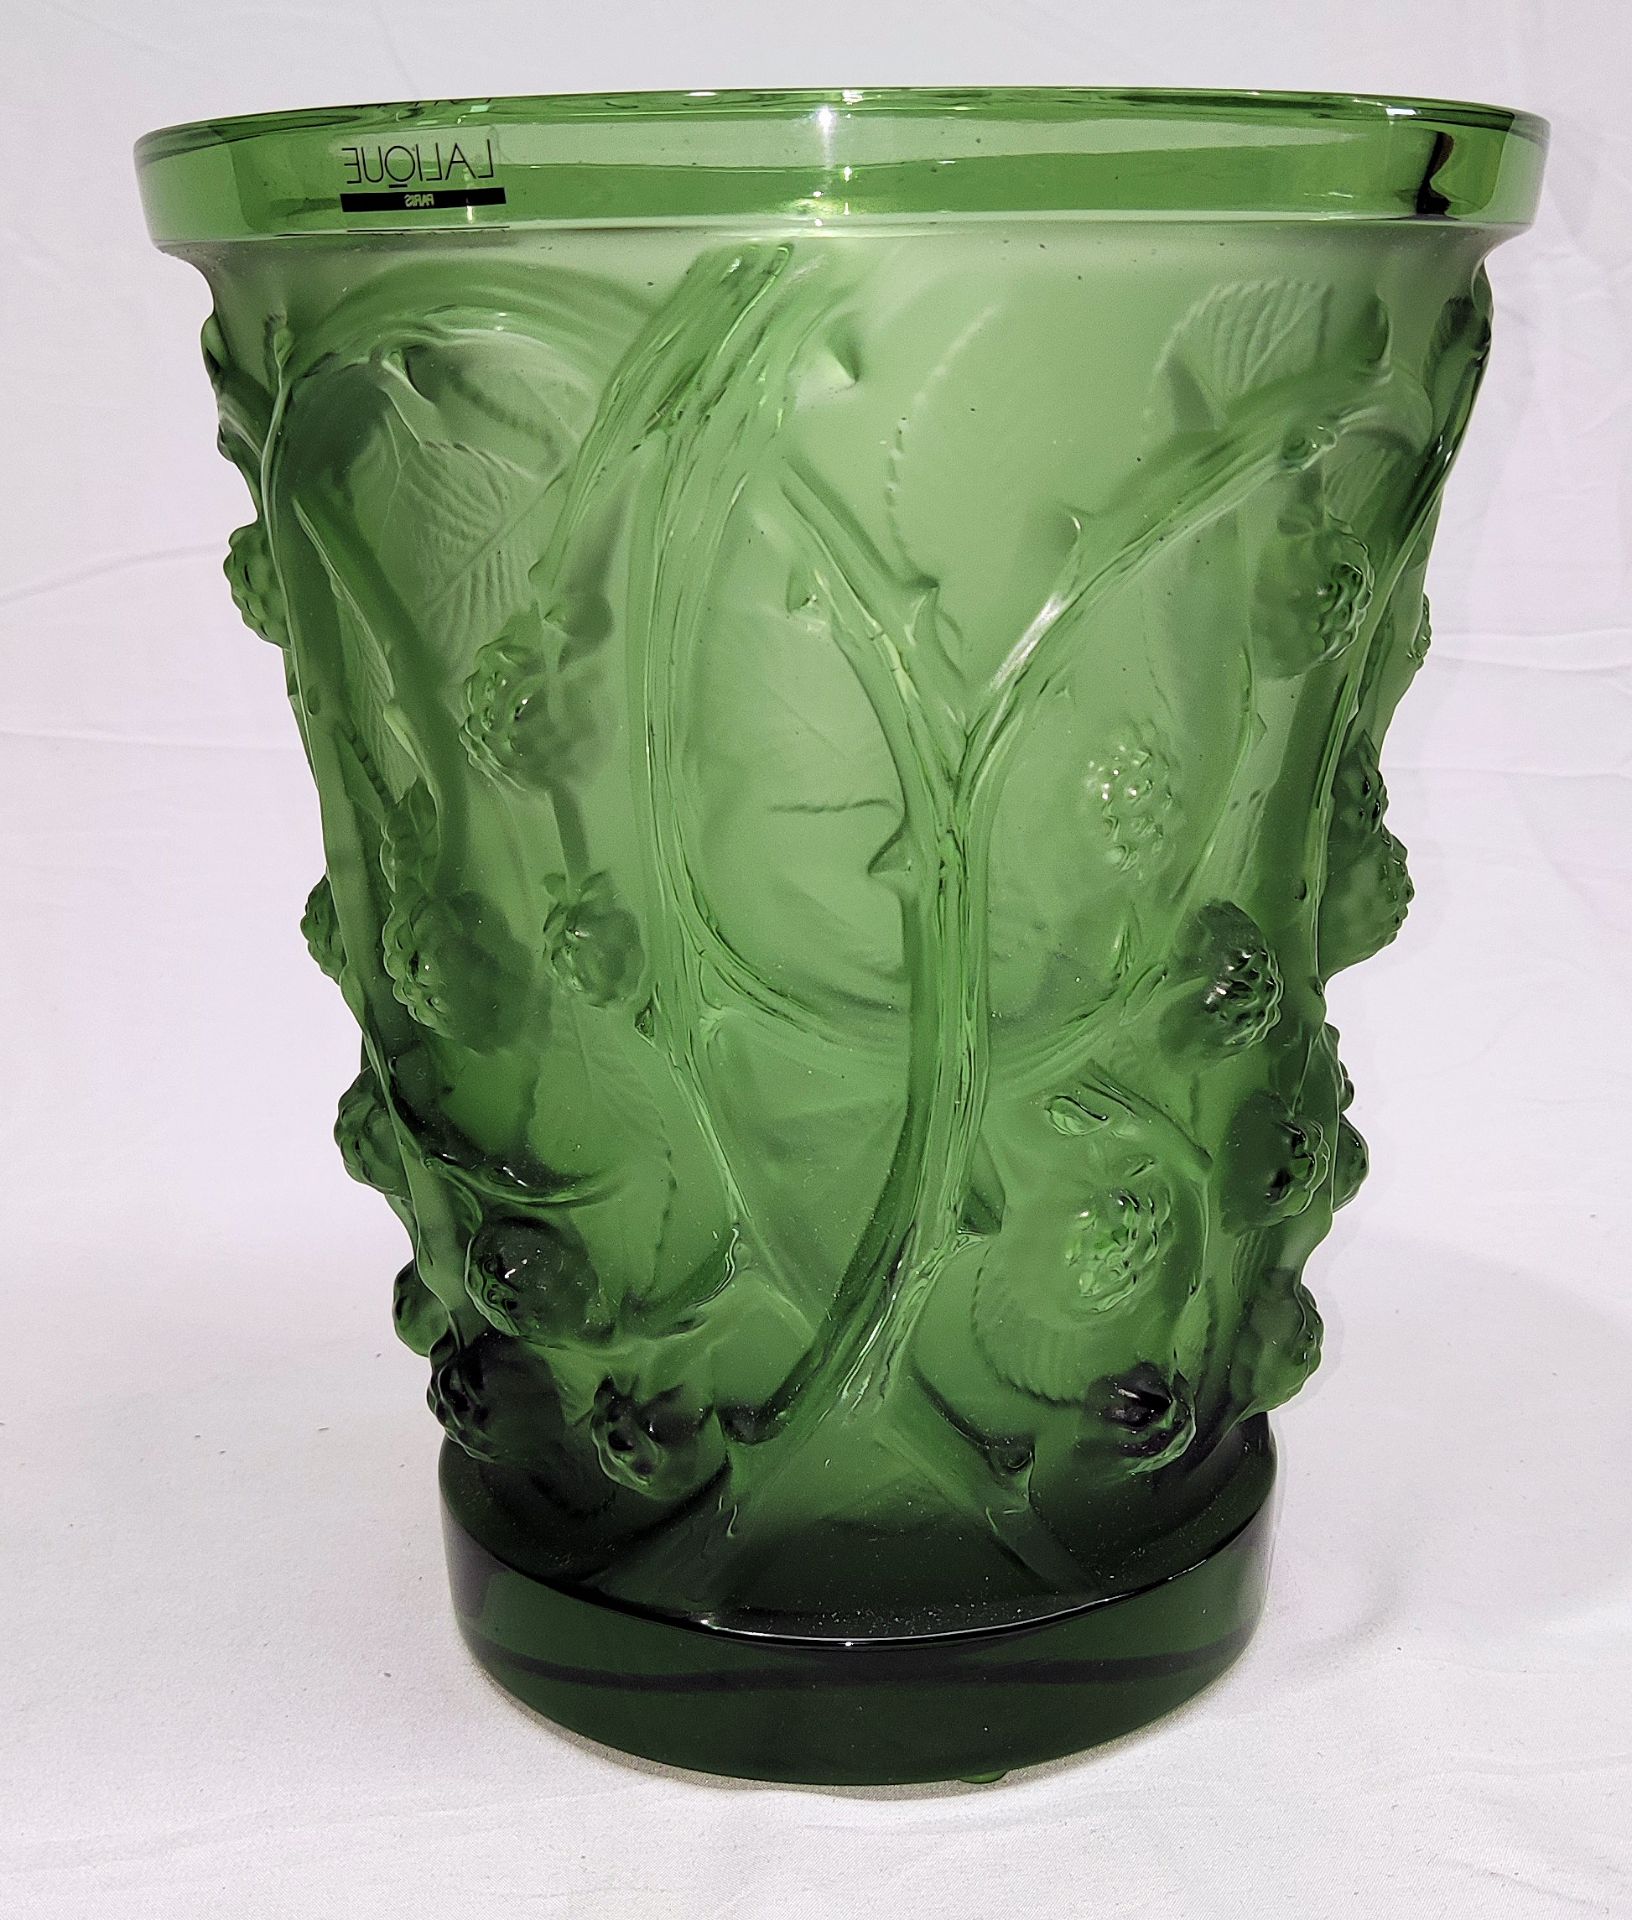 1 x LALIQUE 'Mures' Exquisite Handcrafted French Green Crystal Medium Vase - Original RRP £2,690 - Image 3 of 23